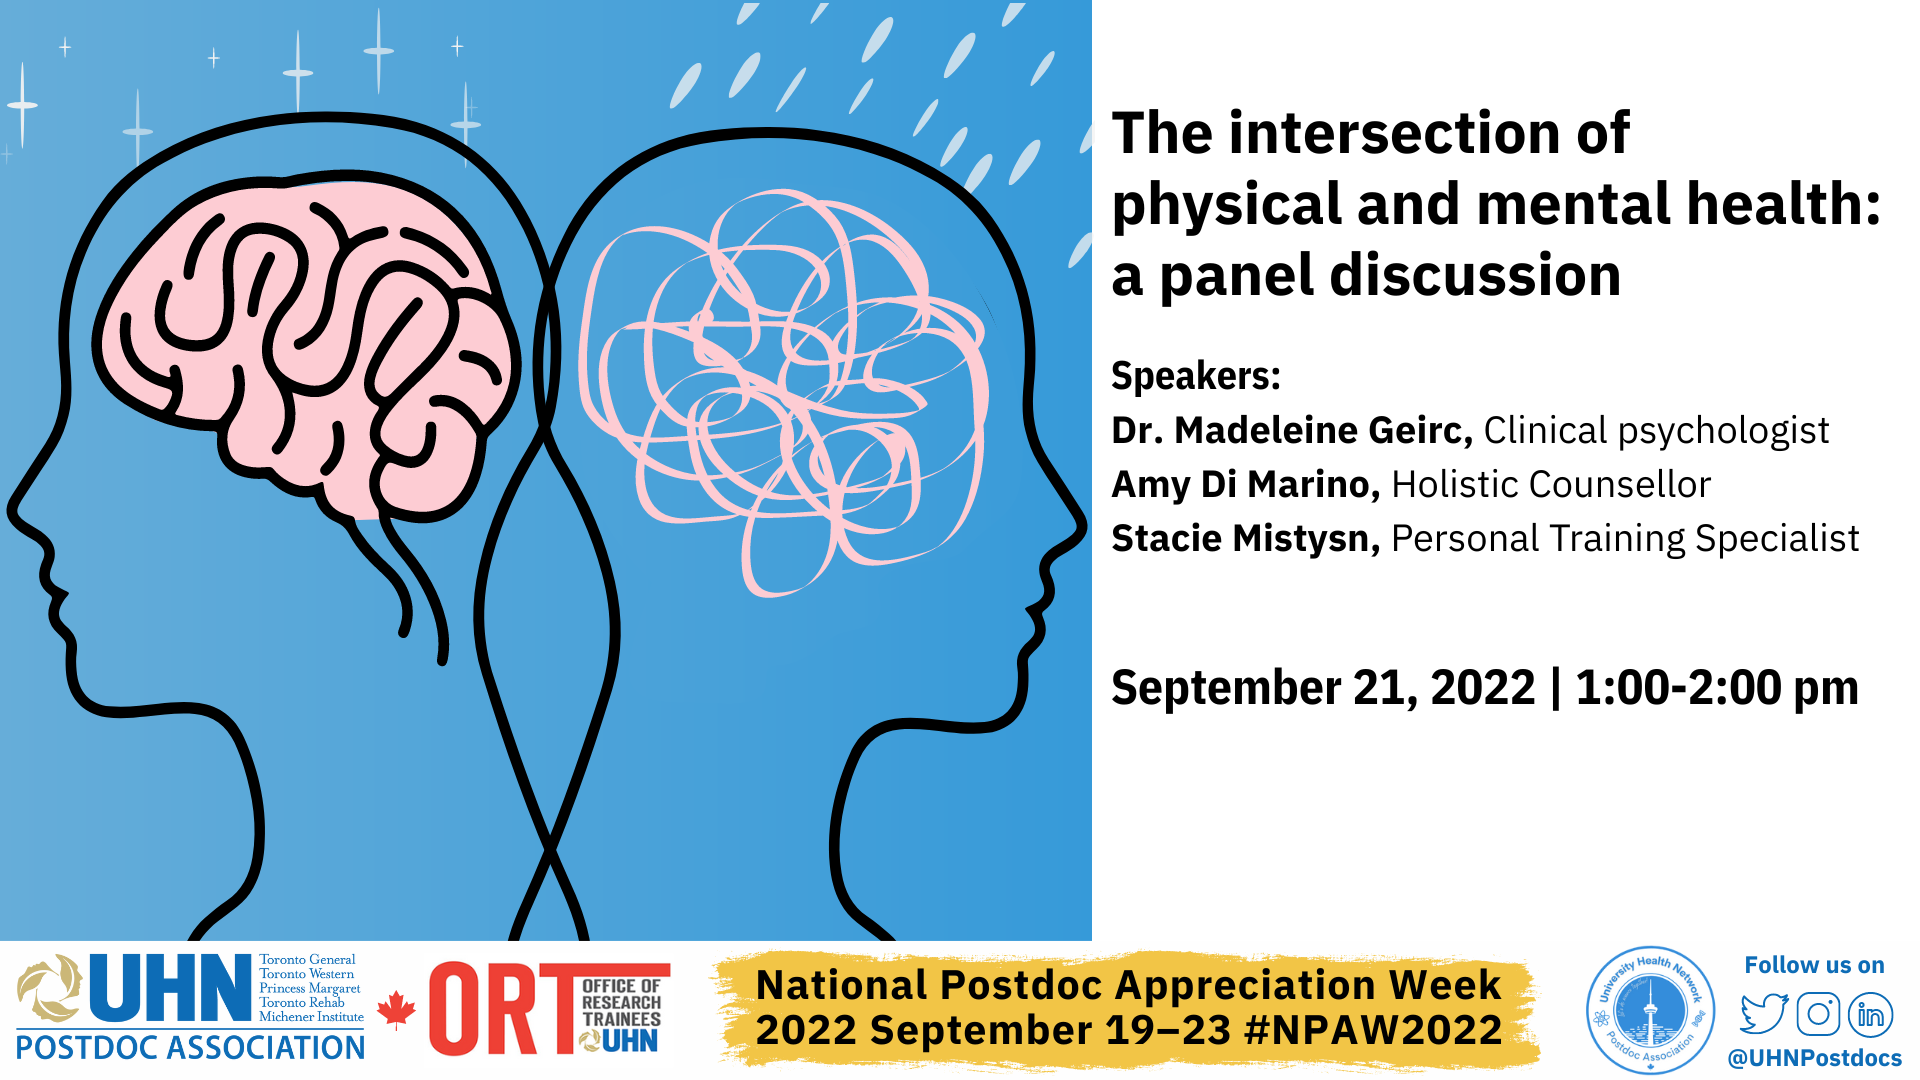 Poster for Day 3 of postdoc appreciation week. At the bottom is a banner with the UHN Postdoc Association logo, the ORT logo, National Postdoc Appreciation Week, 2022 September 19-23. #NPAW2022 and the details for how to follow the UHNPA on Twitter, Instagram and LinkedIn. The poster reads The Intersections of physical and mental health: a panel discussion. Speakers: Dr. Madeleine Geirc, Clinical psychologist; Ami Di Marino, holistic counsellor, Stacie Mistysn, Personal Training Specialist